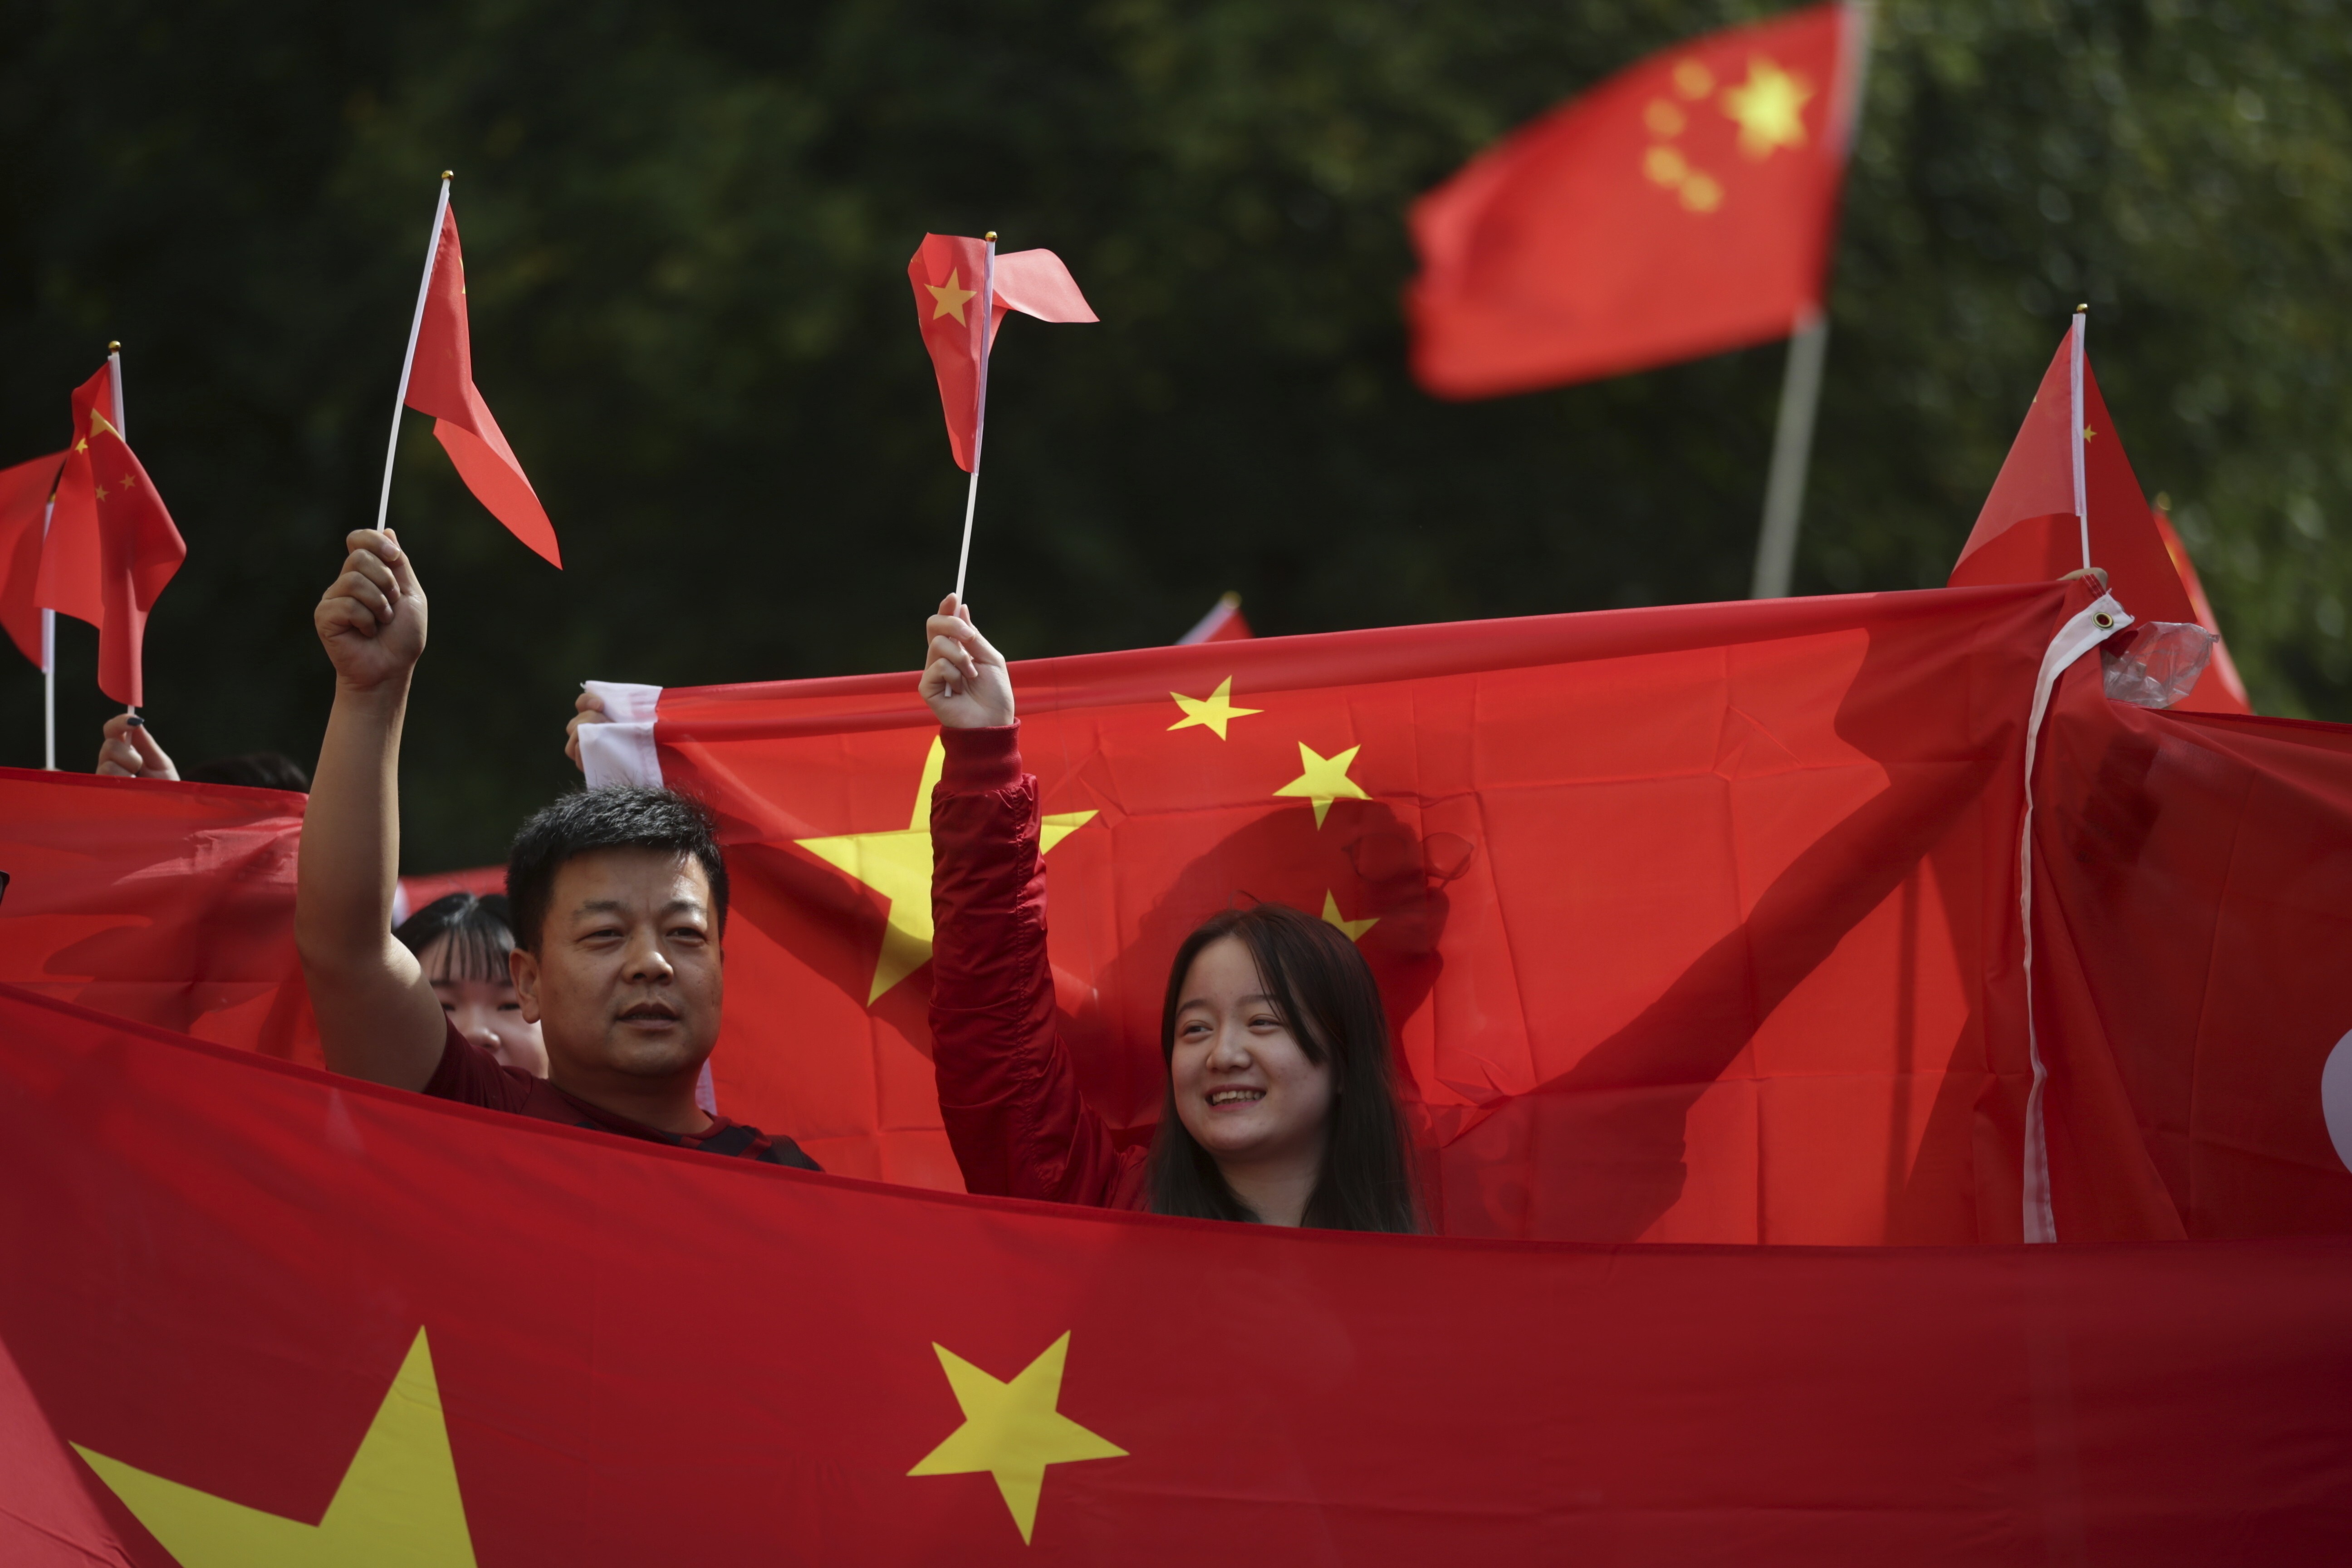 Pro-China Chinese Canadians show their support for Hong Kong’s extradition bill, in the midst of an anti-extradition rally in Vancouver, Canada, on August 17 last year. Photo: The Canadian Press via AP